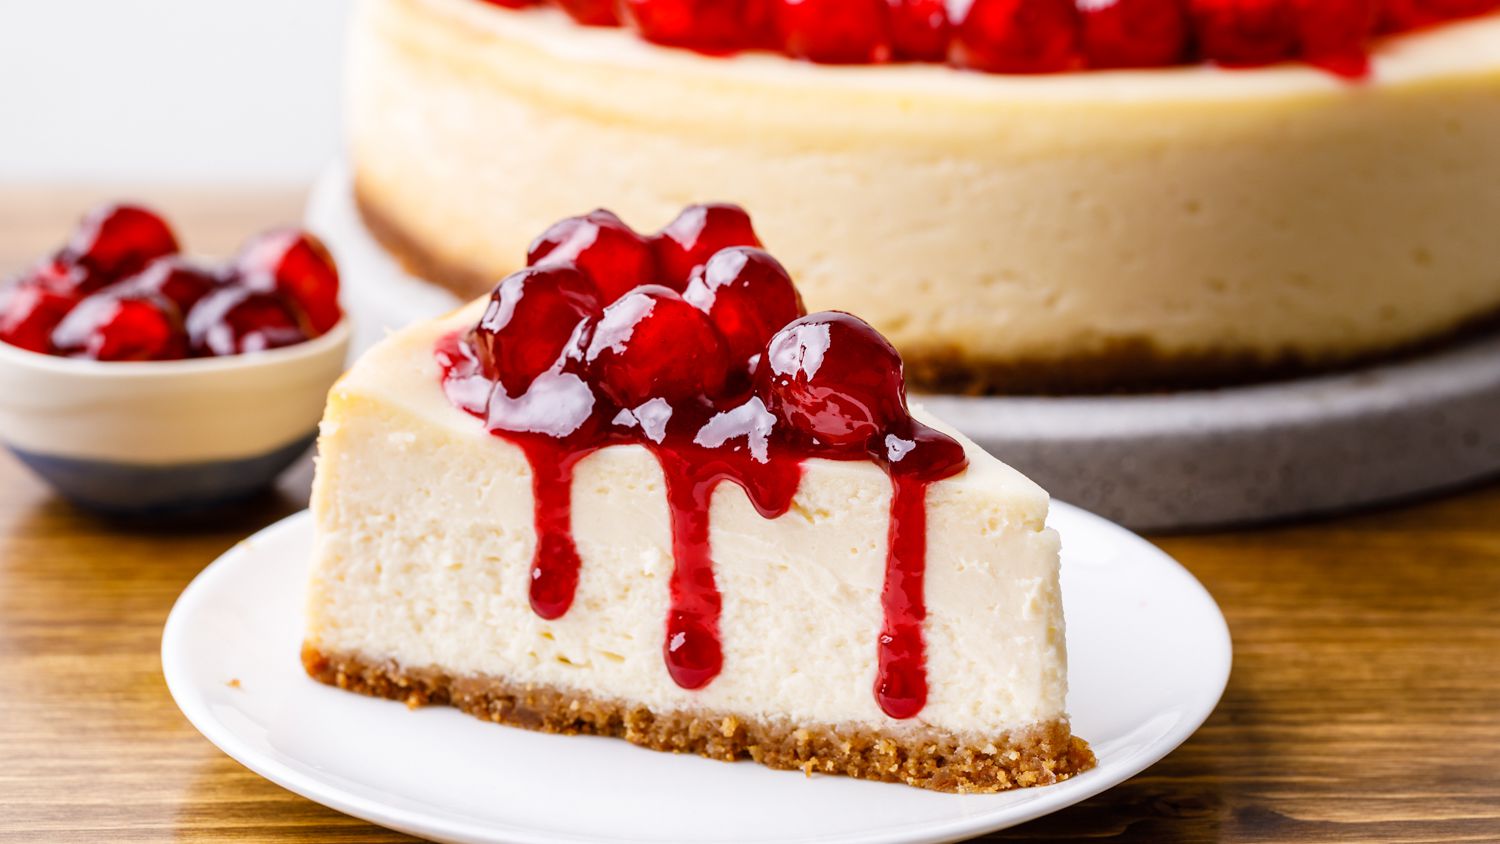 Grab Some Food at This All-Day Buffet to Find Out What People Secretly Dislike About You New York Cheesecake